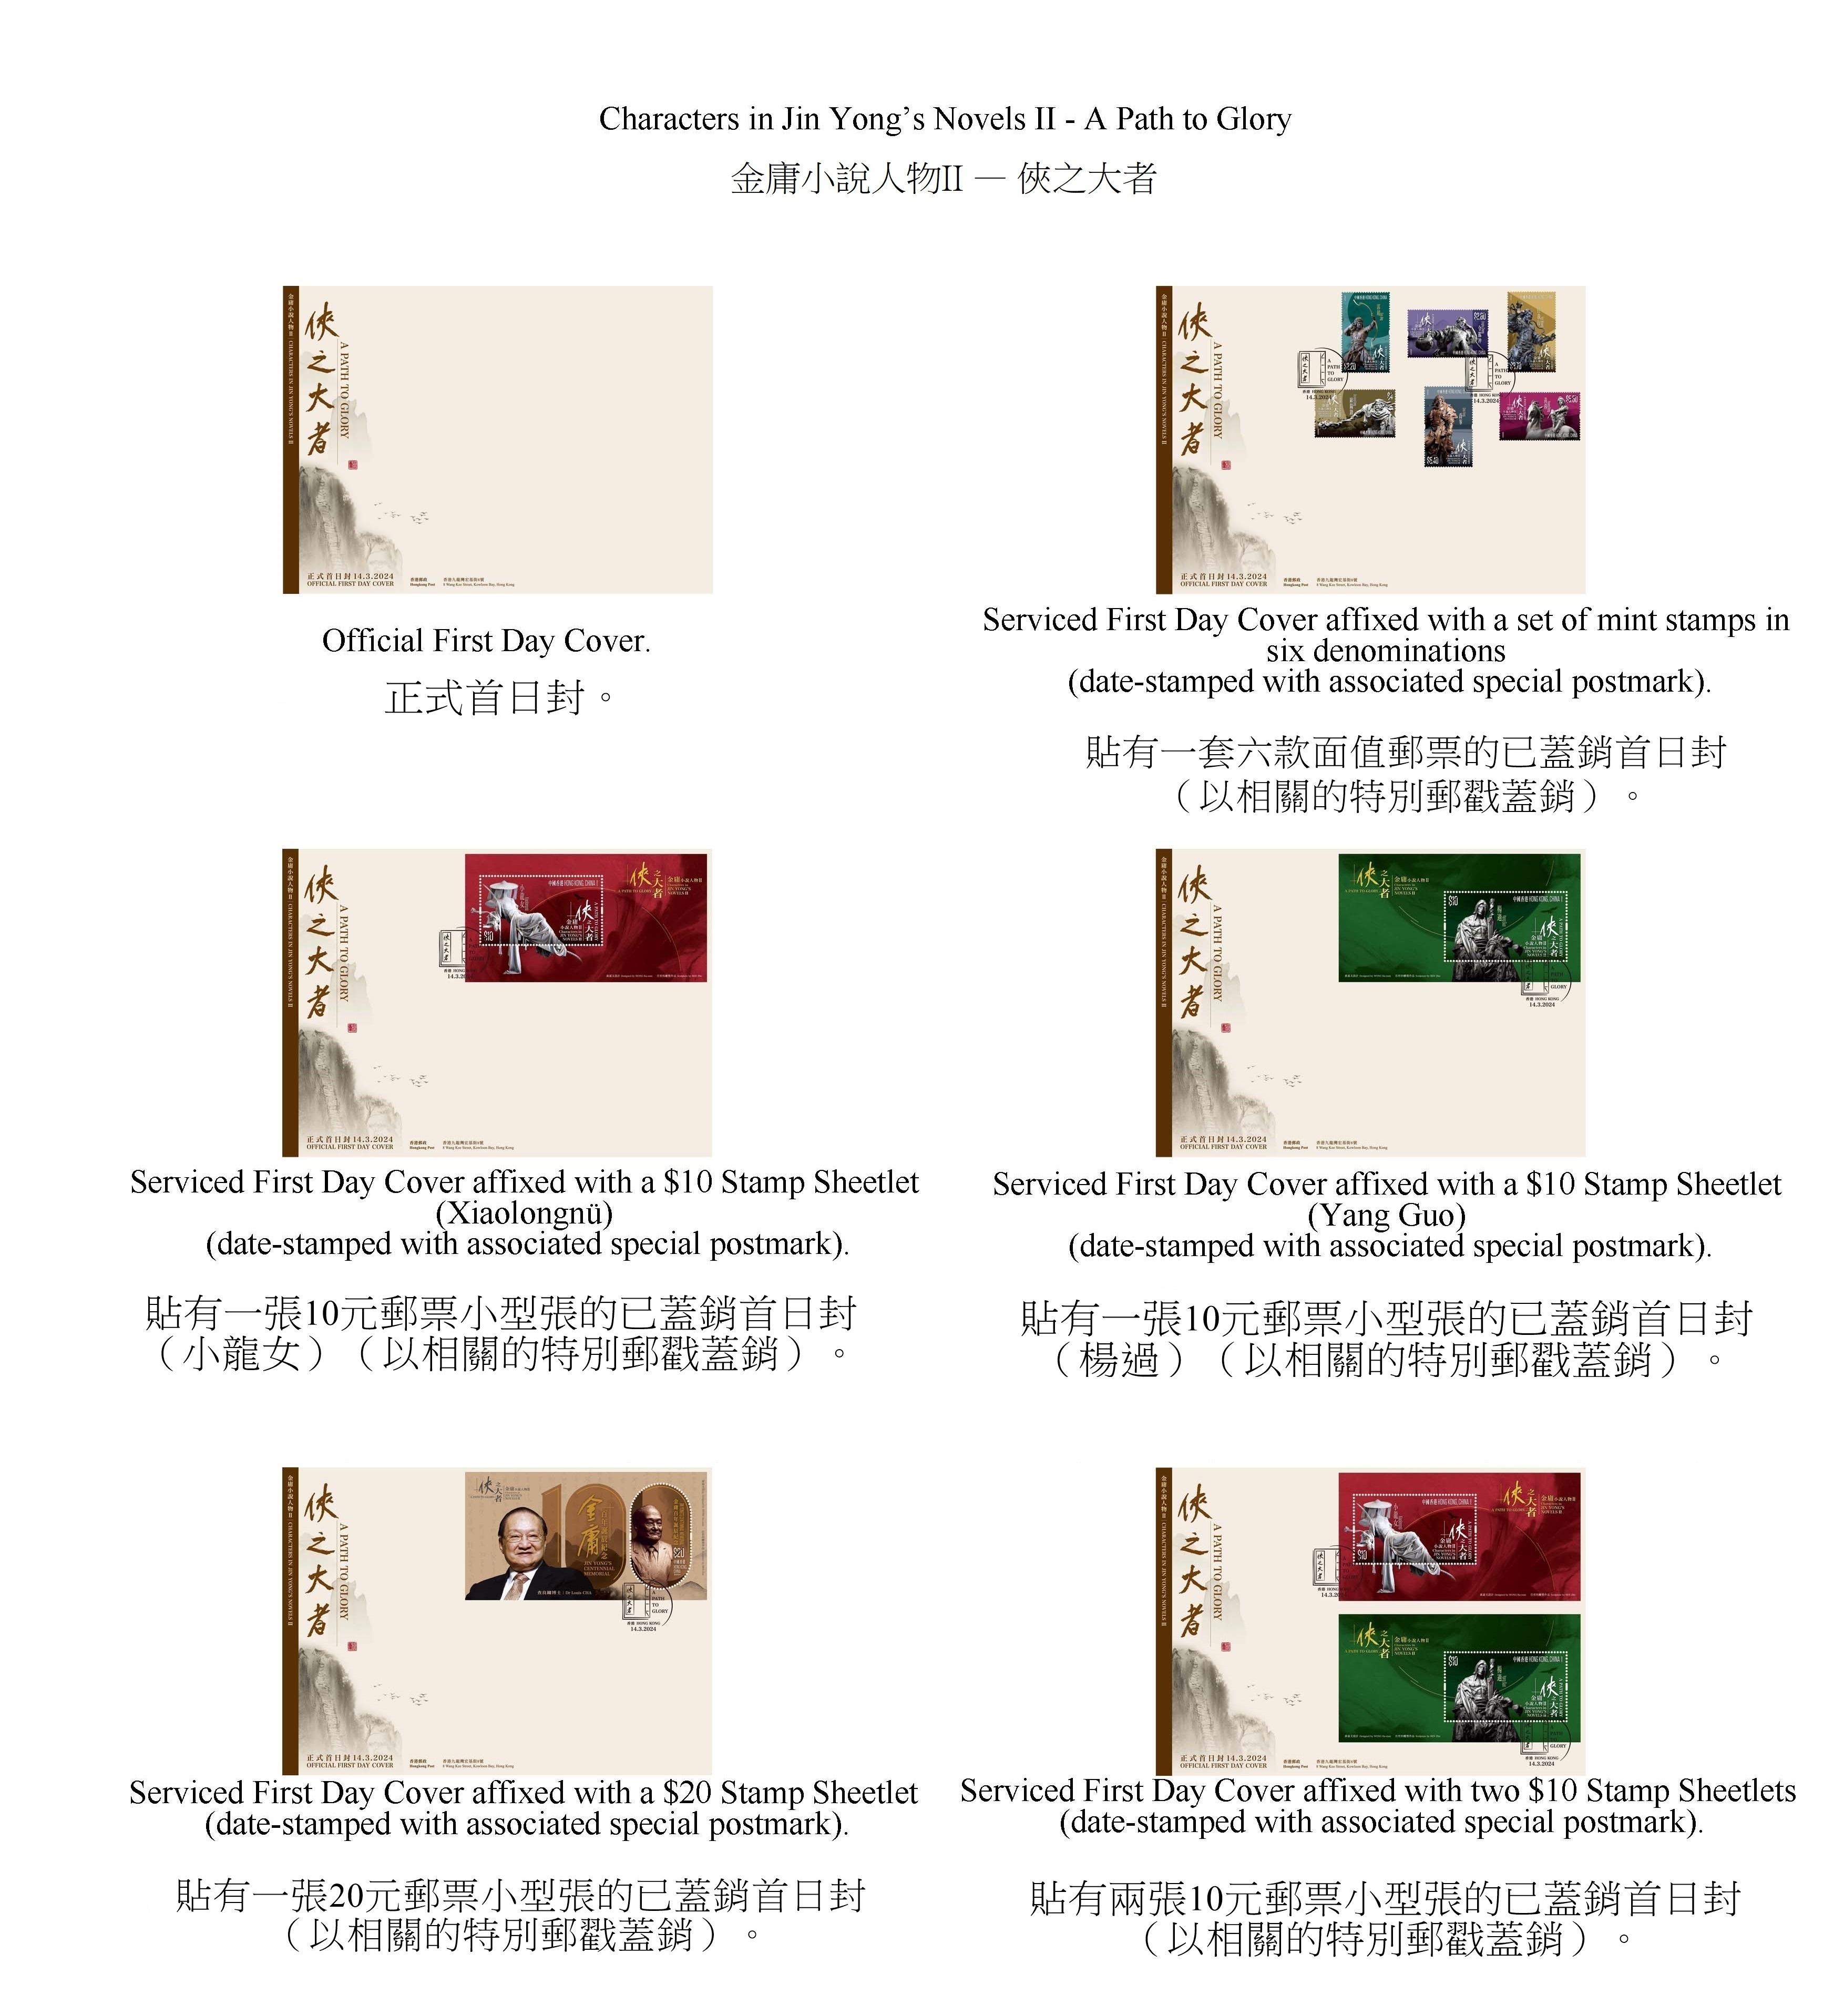 Hongkong Post will launch a special stamp issue and associated philatelic products on the theme of "Characters in Jin Yong's Novels II - A Path to Glory" on March 14 (Thursday). Photo shows the first day covers.

